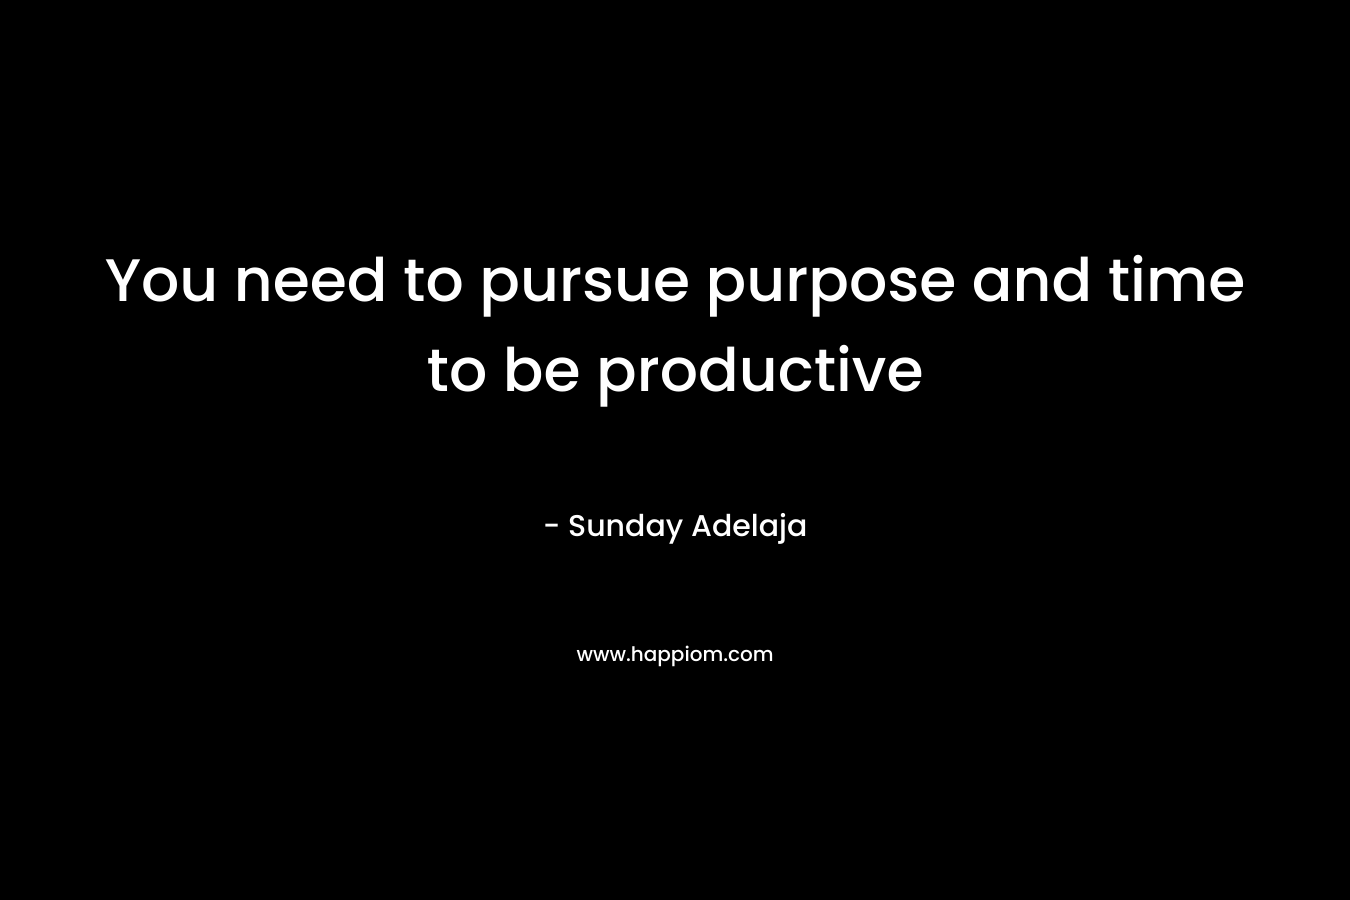 You need to pursue purpose and time to be productive